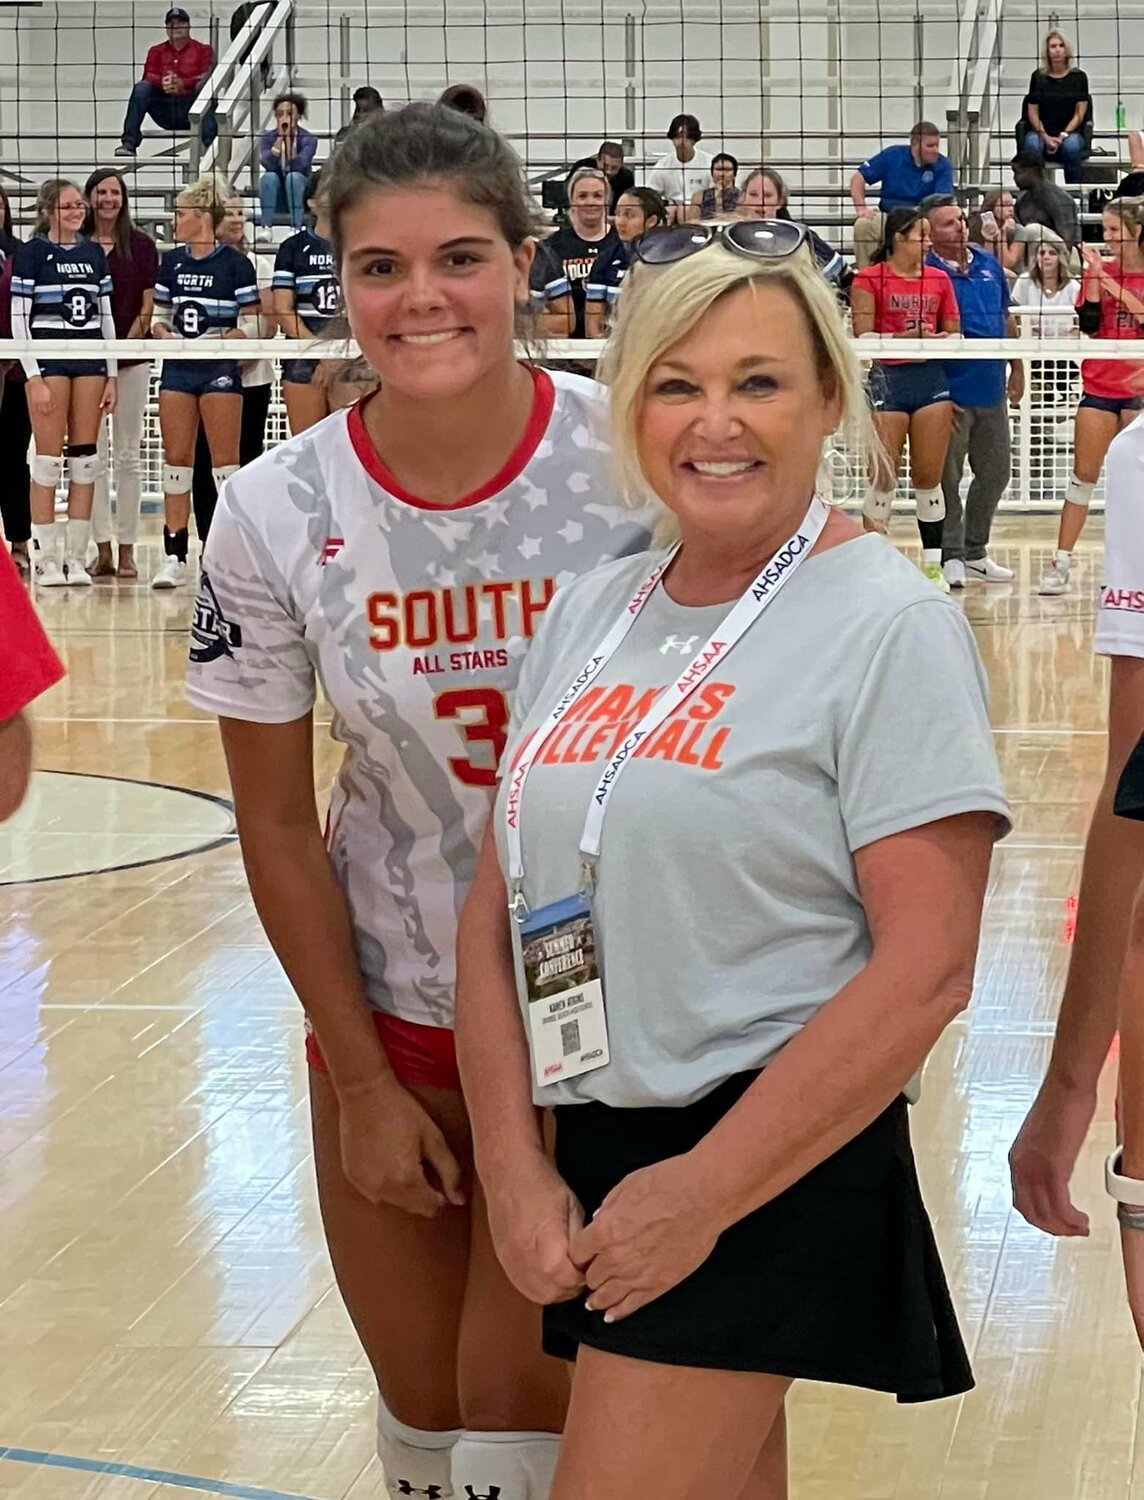 Orange Beach head volleyball coach Karen Atkins poses for a picture with Mako rising senior Amelia Edgeworth before the volleyball contest as part of the ASHSAA’s All-Star Week in Montgomery. Edgeworth collected 4 kills and 3 digs to help the South All-Stars post a 3-1 win that cut into the North All-Stars’ all-time lead in the series to 15-10.